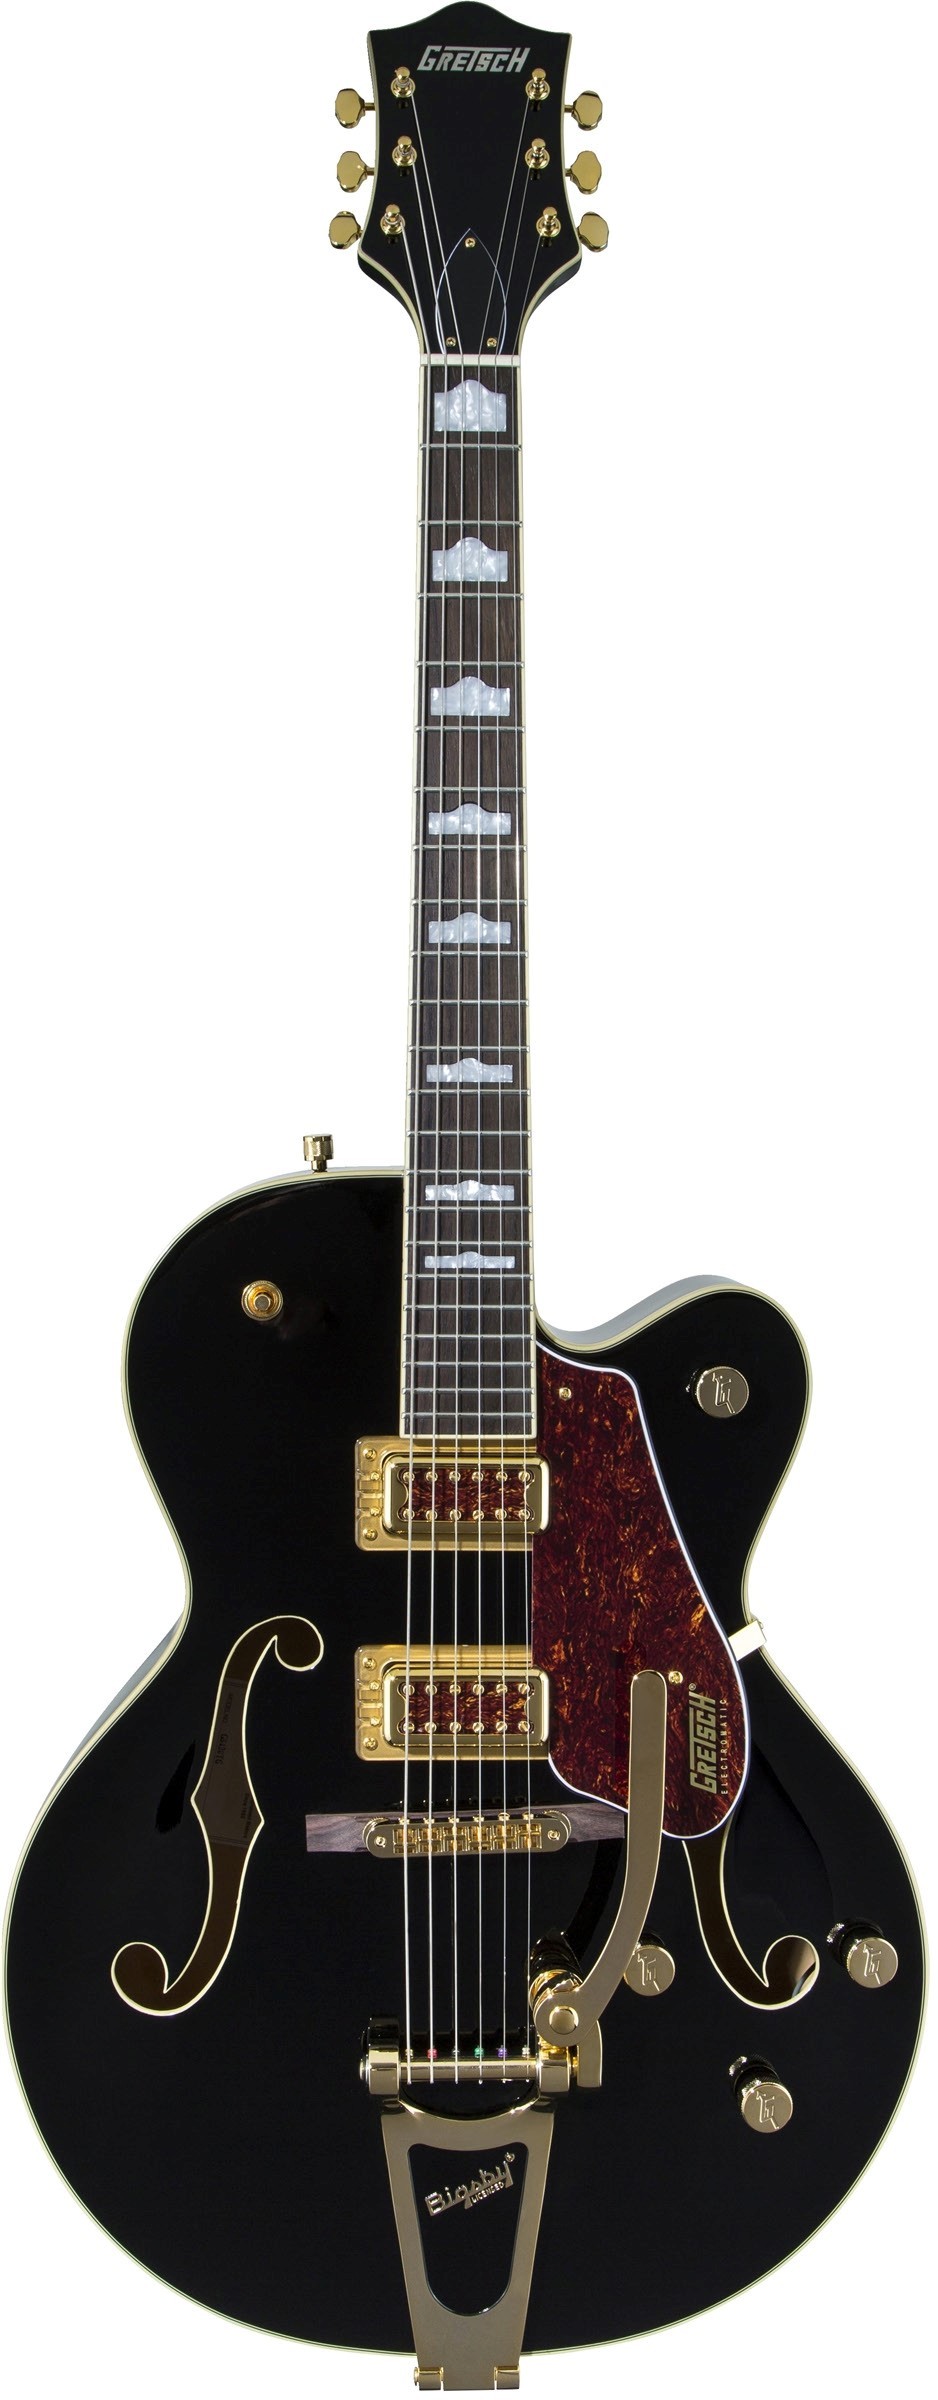 Gretsch G5420TG Electromatic Limited Edition Black